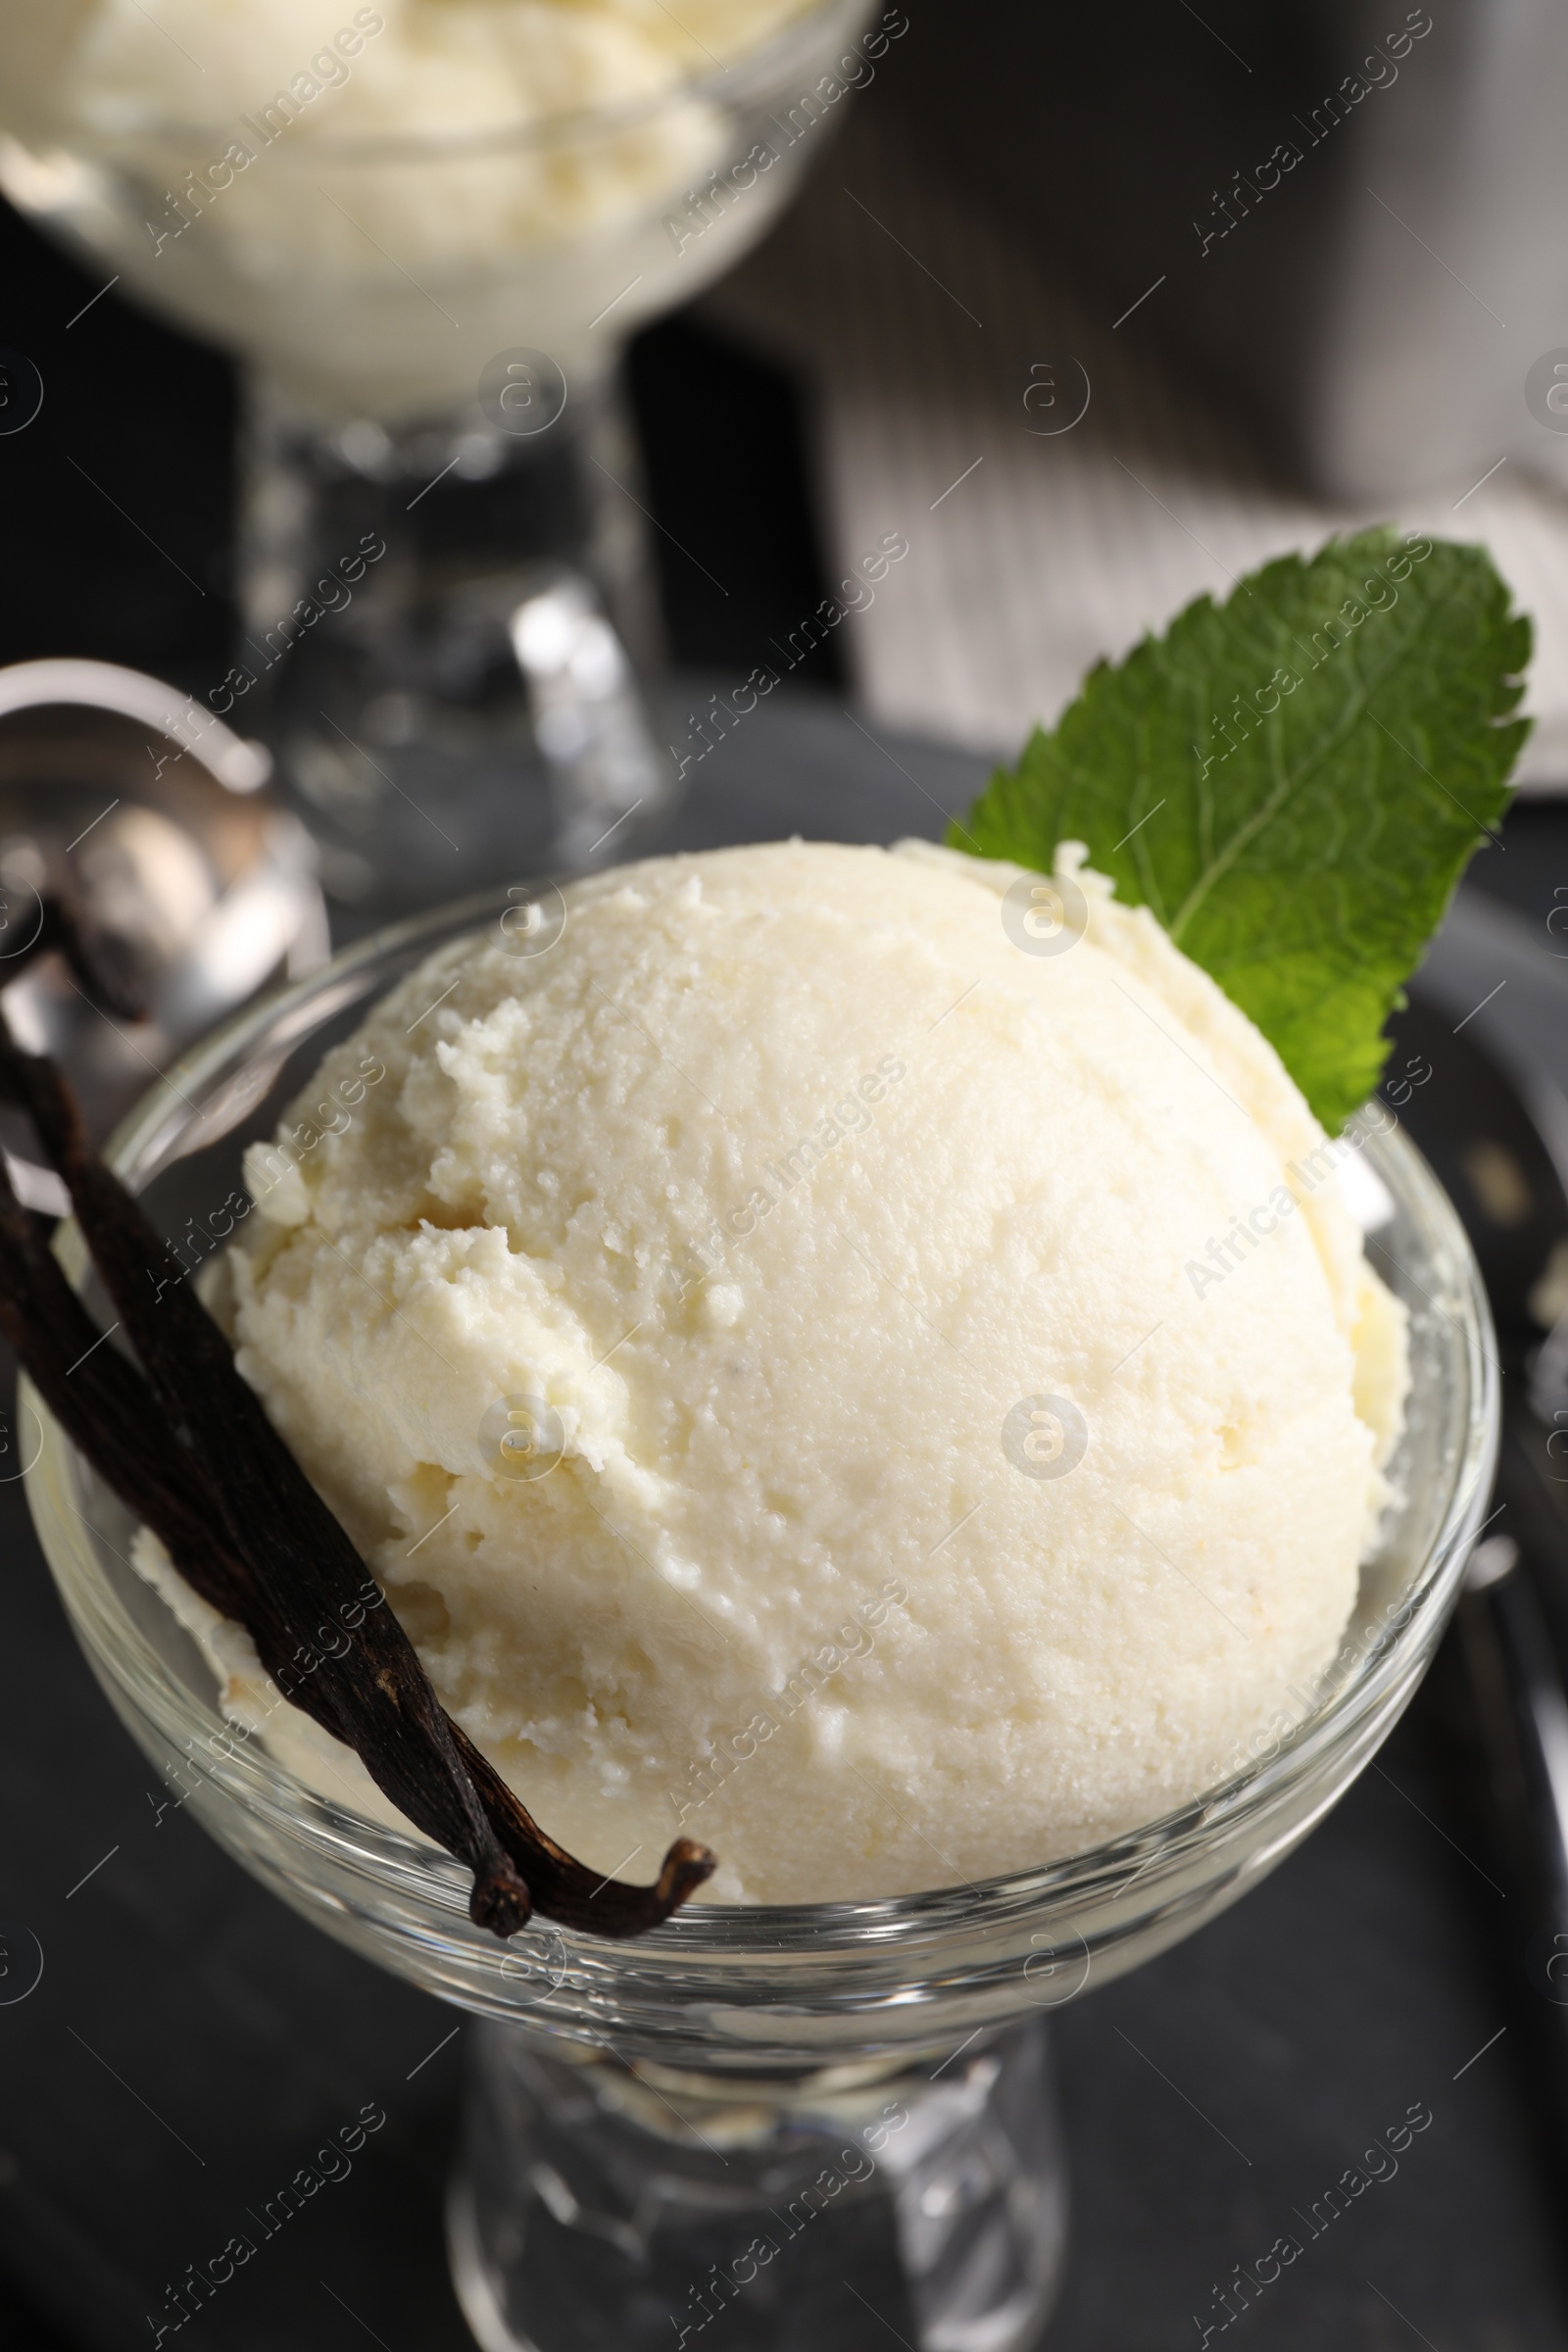 Photo of Tasty ice cream with vanilla pods in glass dessert bowl on table, closeup